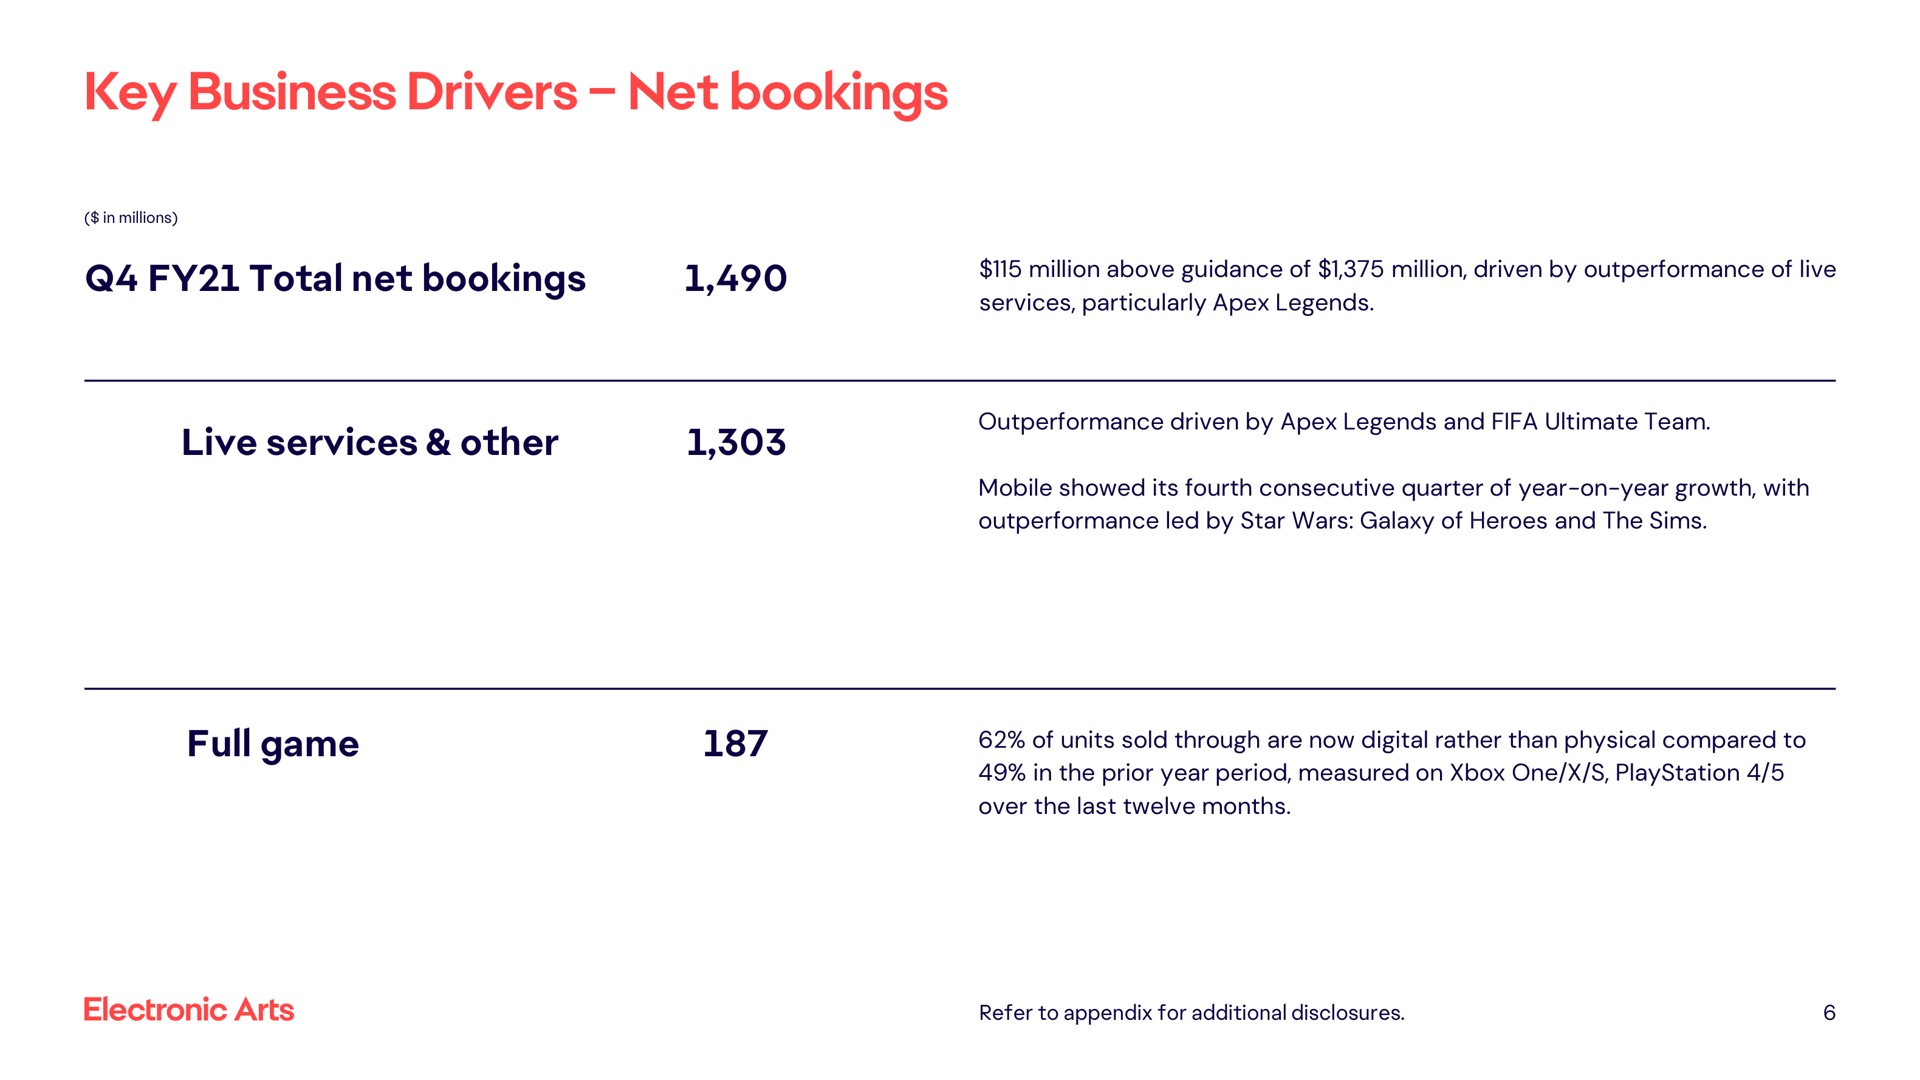 key business drivers net bookings total net bookings live services other full game | Electronic Arts